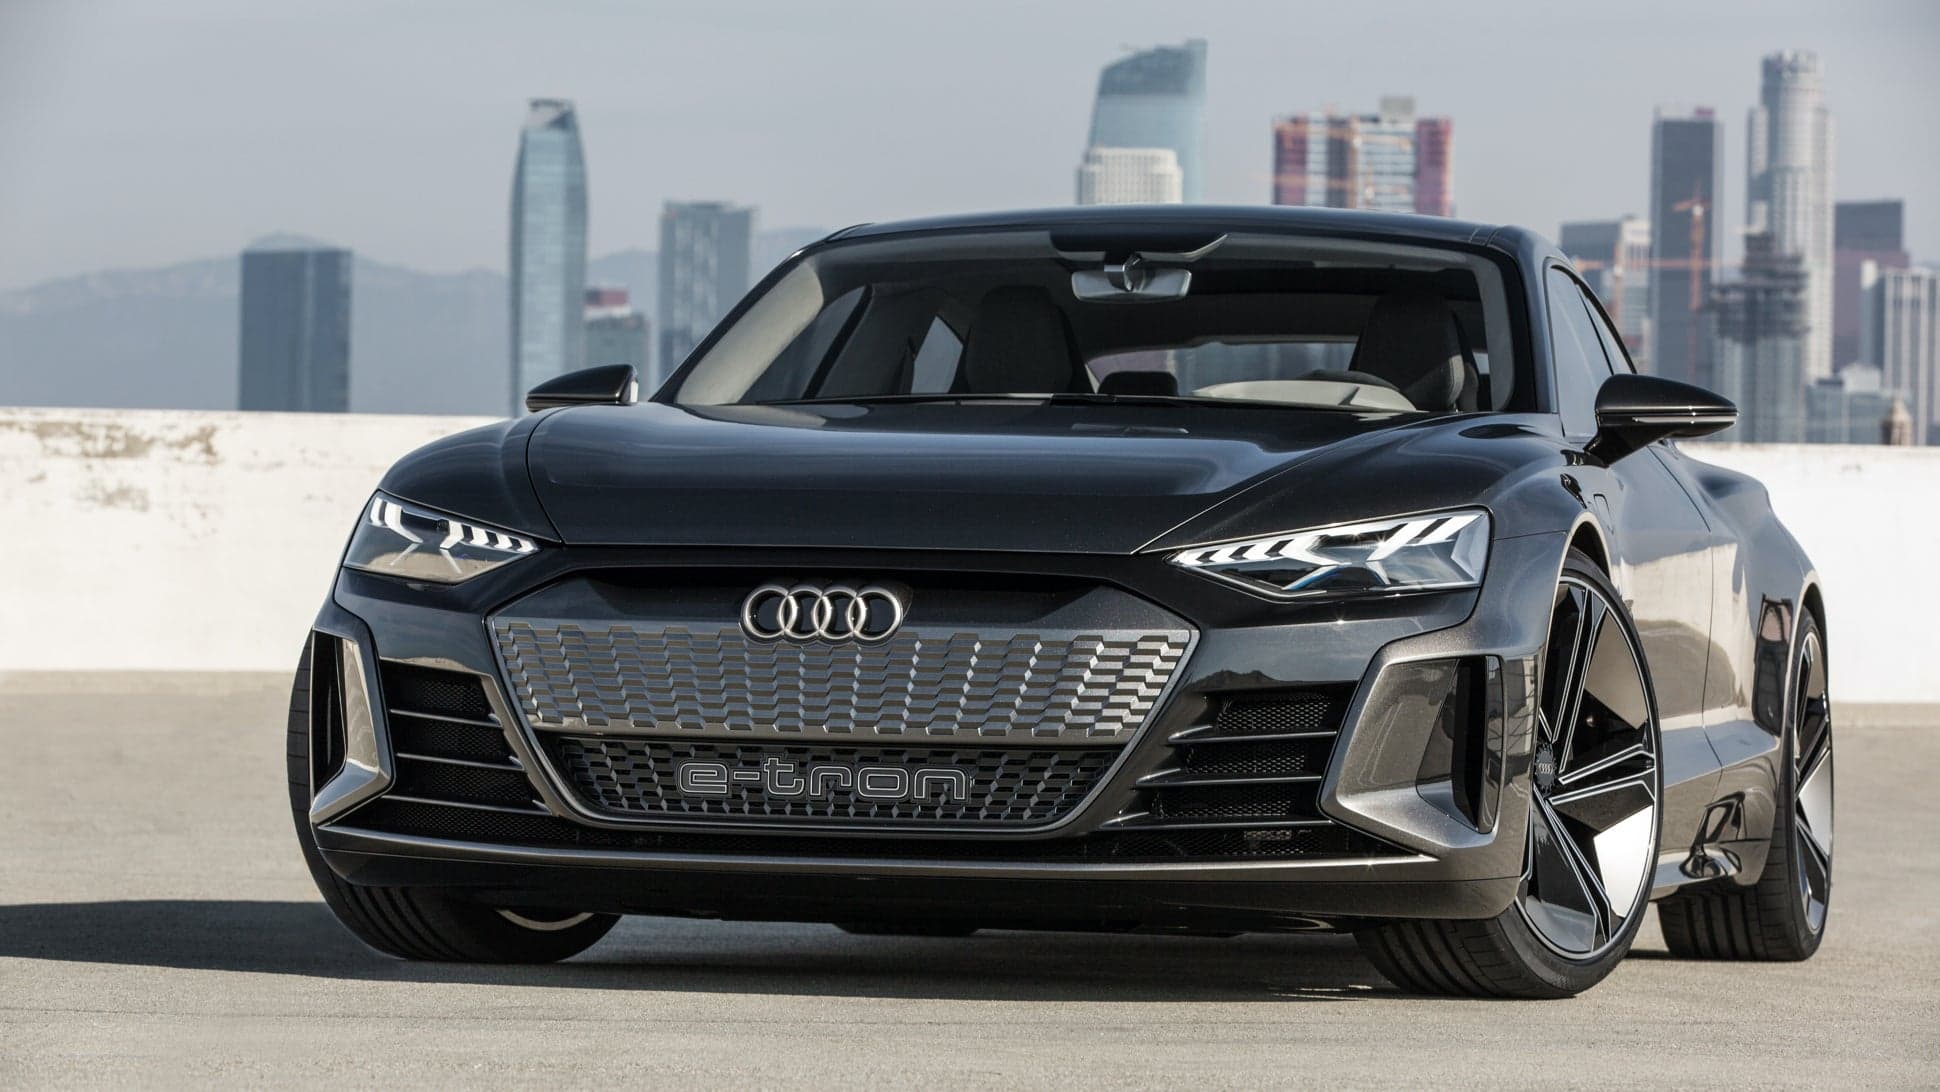 Audi Could Finally Move Away From Huge Grilles On the Front of Their Cars